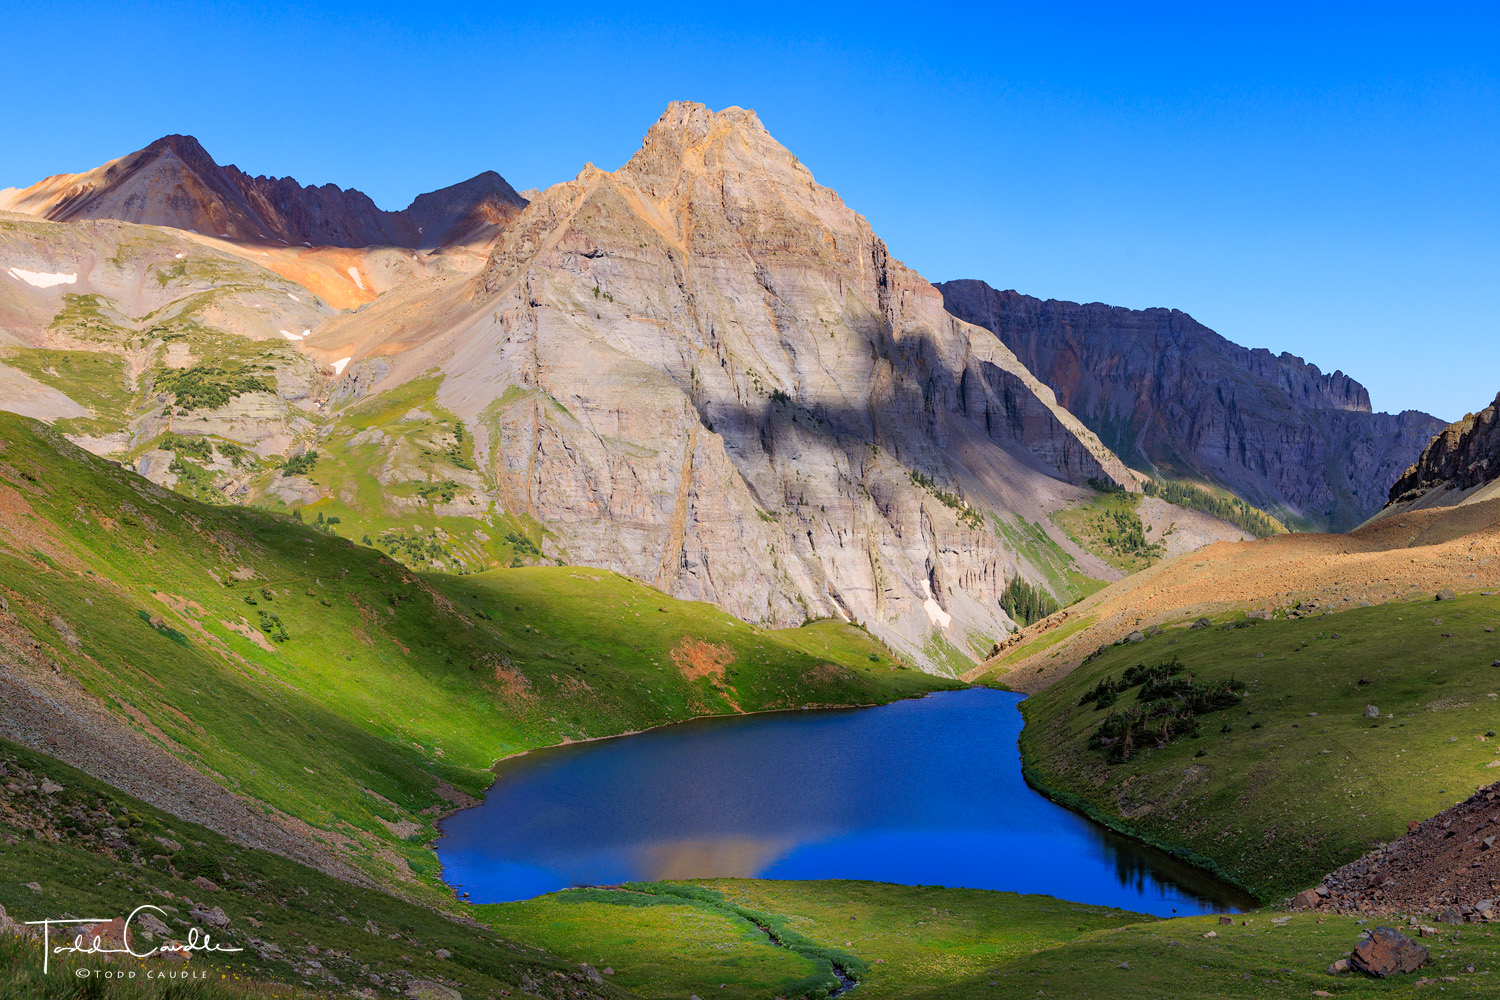 A perch above the middle of three Blue Lakes is the perfect place to enjoy a summer morning in the Colorado high country.